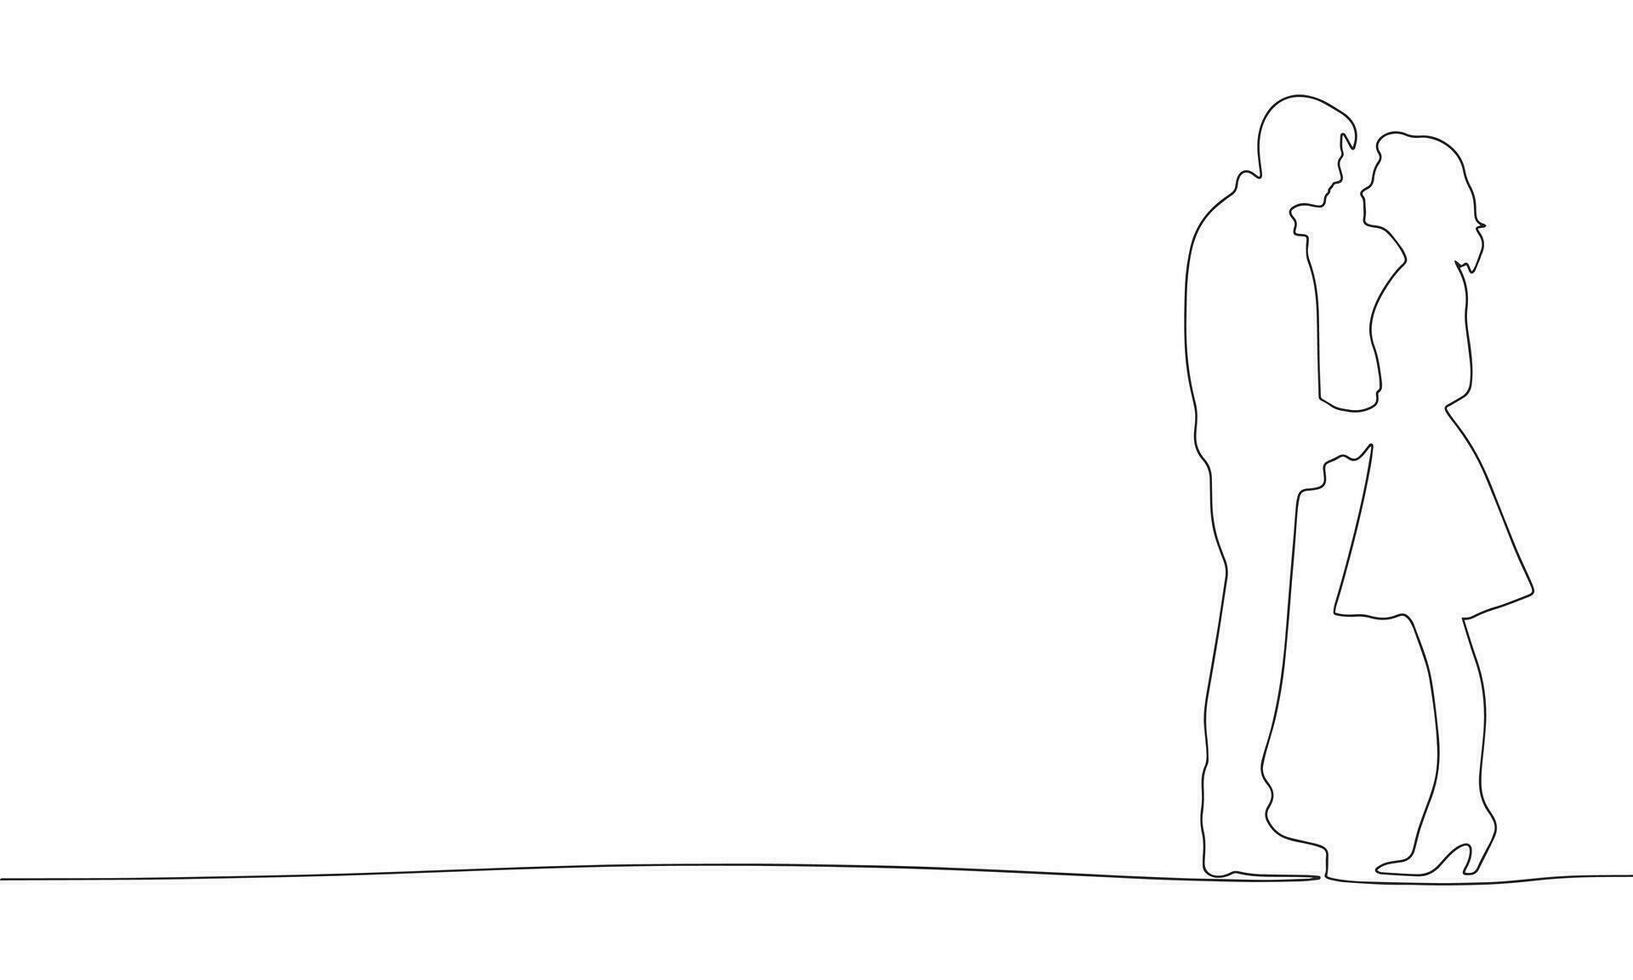 Kissed couple one line continuous. Love man and woman line art. Man and woman silhouette outline. Vector illustration.